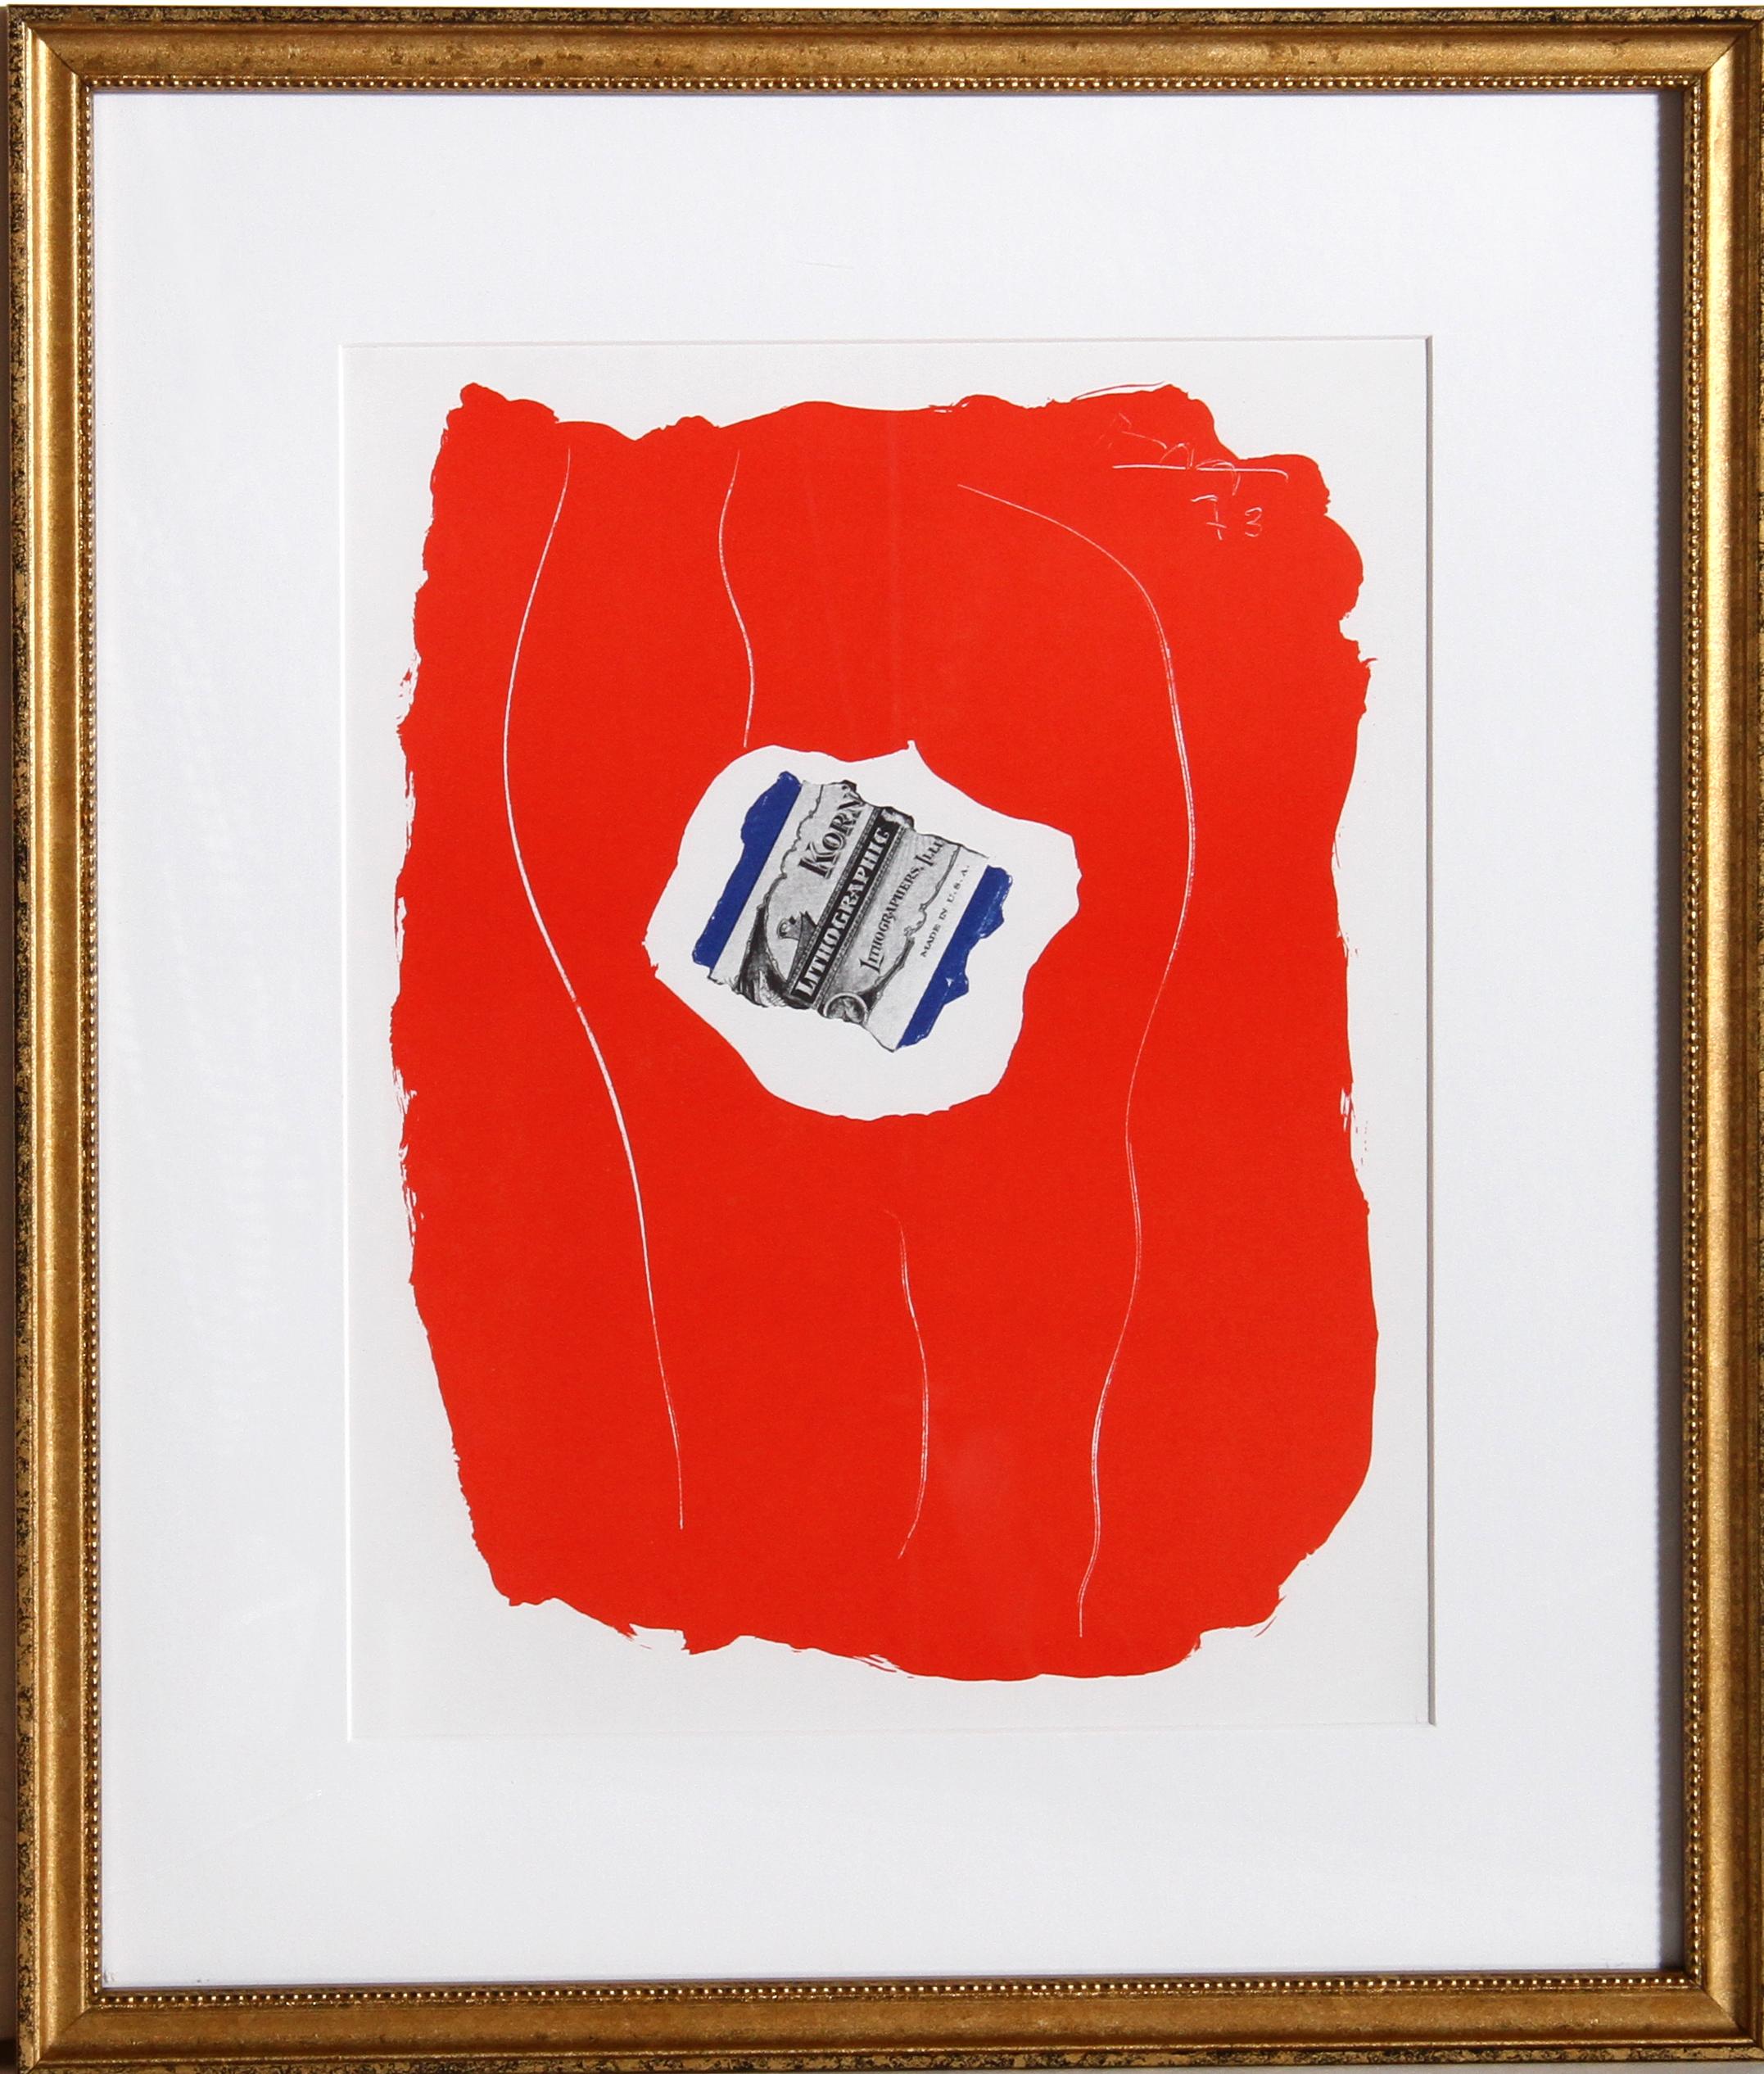 Artist: Robert Motherwell
Title: Tricolor 137
Year: 1973
Medium: Offset Lithograph, signed in the plate
Size: 15 x 10.5 in. (38.1 x 26.67 cm)
Frame: 19 x 16 inches

Published by XXe Siècle Magazine, 1973